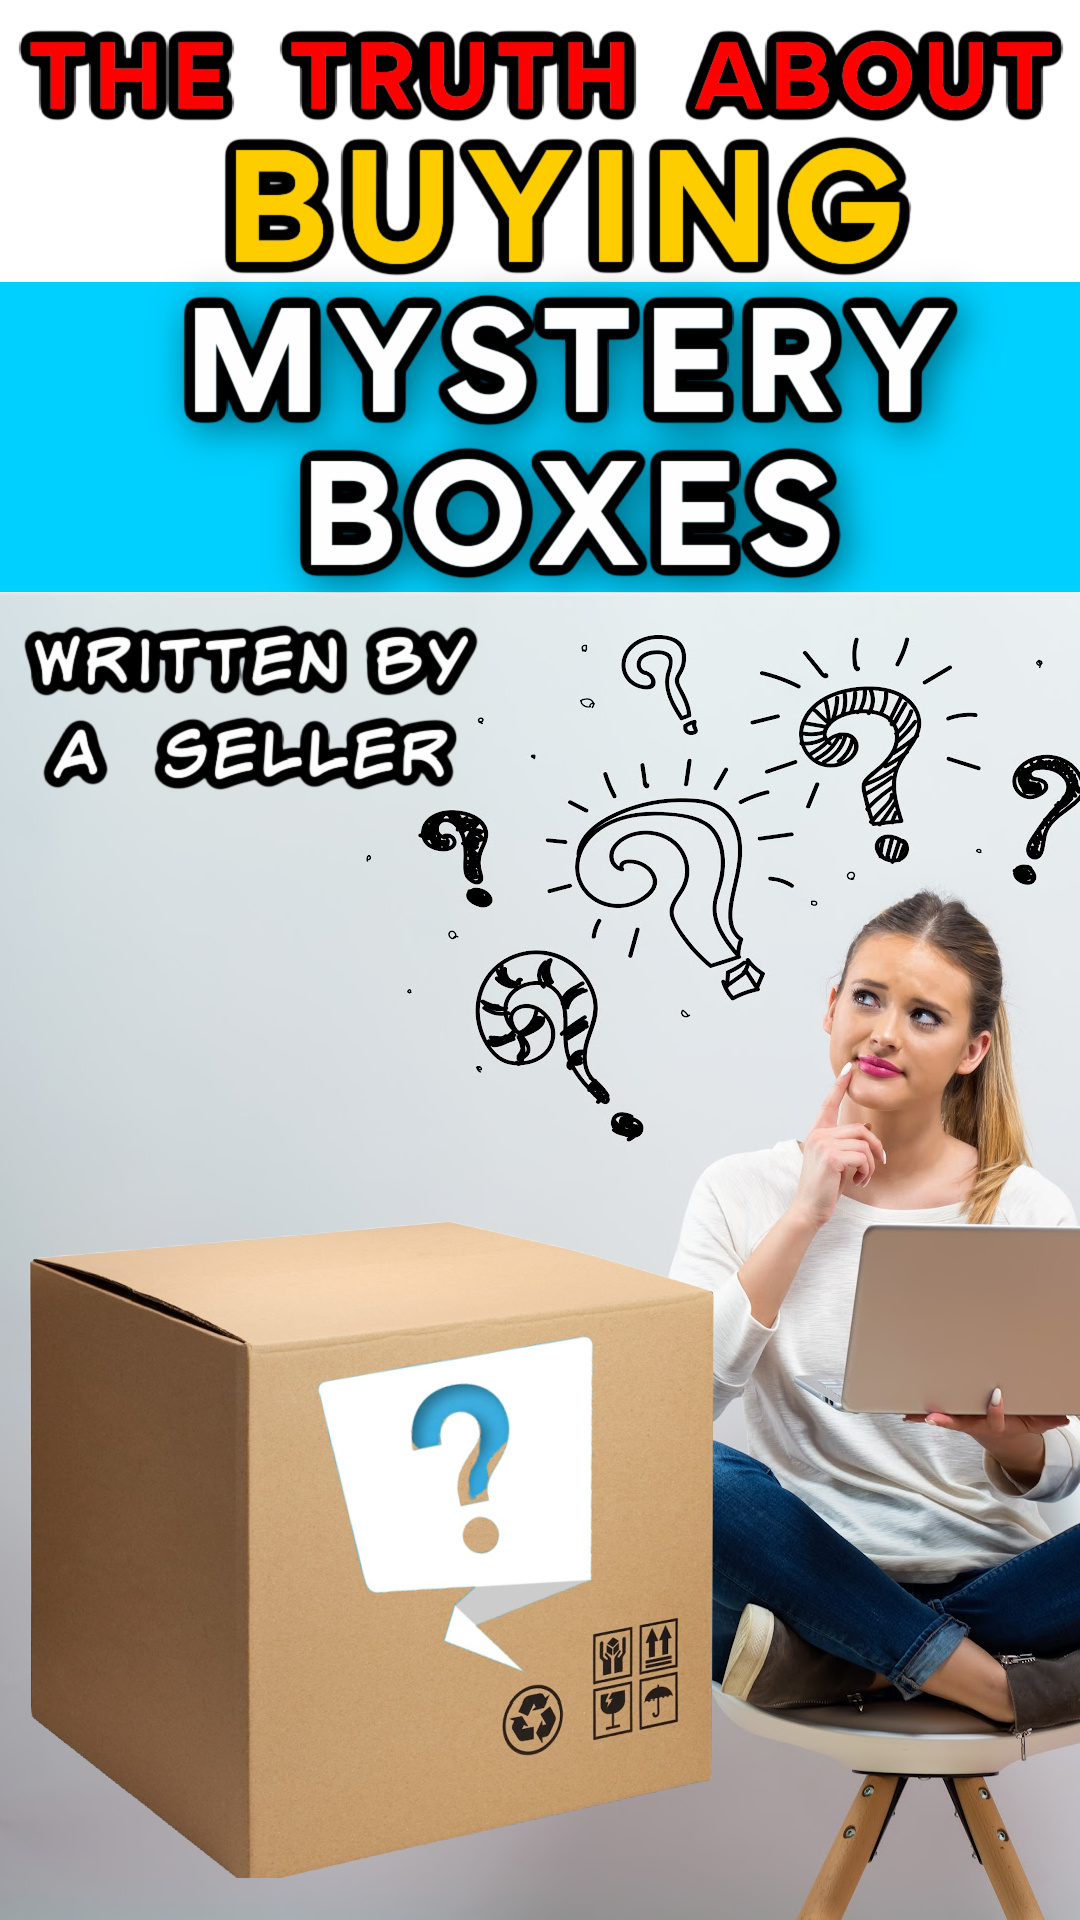 The TRUTH About Buying Mystery Boxes (Written By a SELLER) - Big Brand  Wholesale